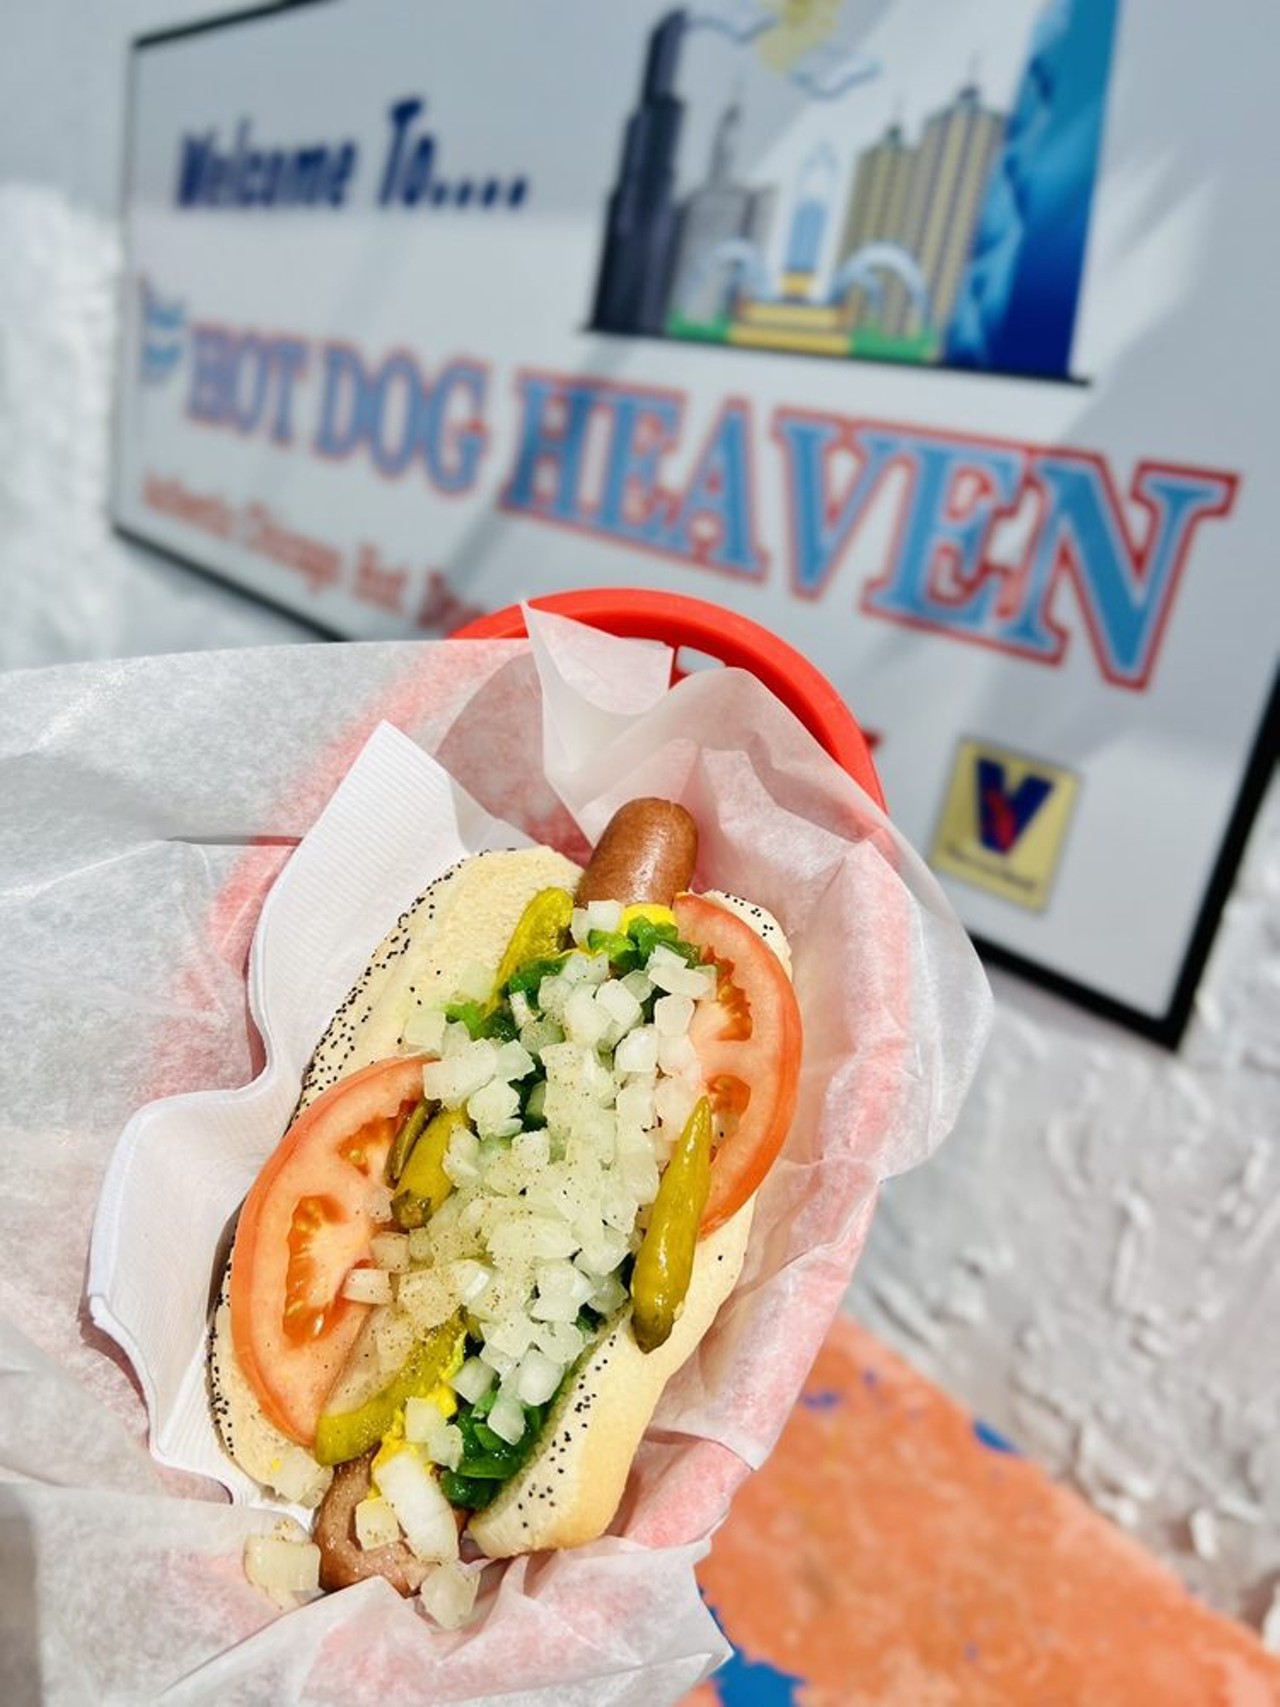 Hot Dog Heaven 
5355 E. Colonial Drive, Orlando
Another Orlando staple, Hot Dog Heaven has been slinging authentic Chicago dogs since 1987, with an unwavering community following.